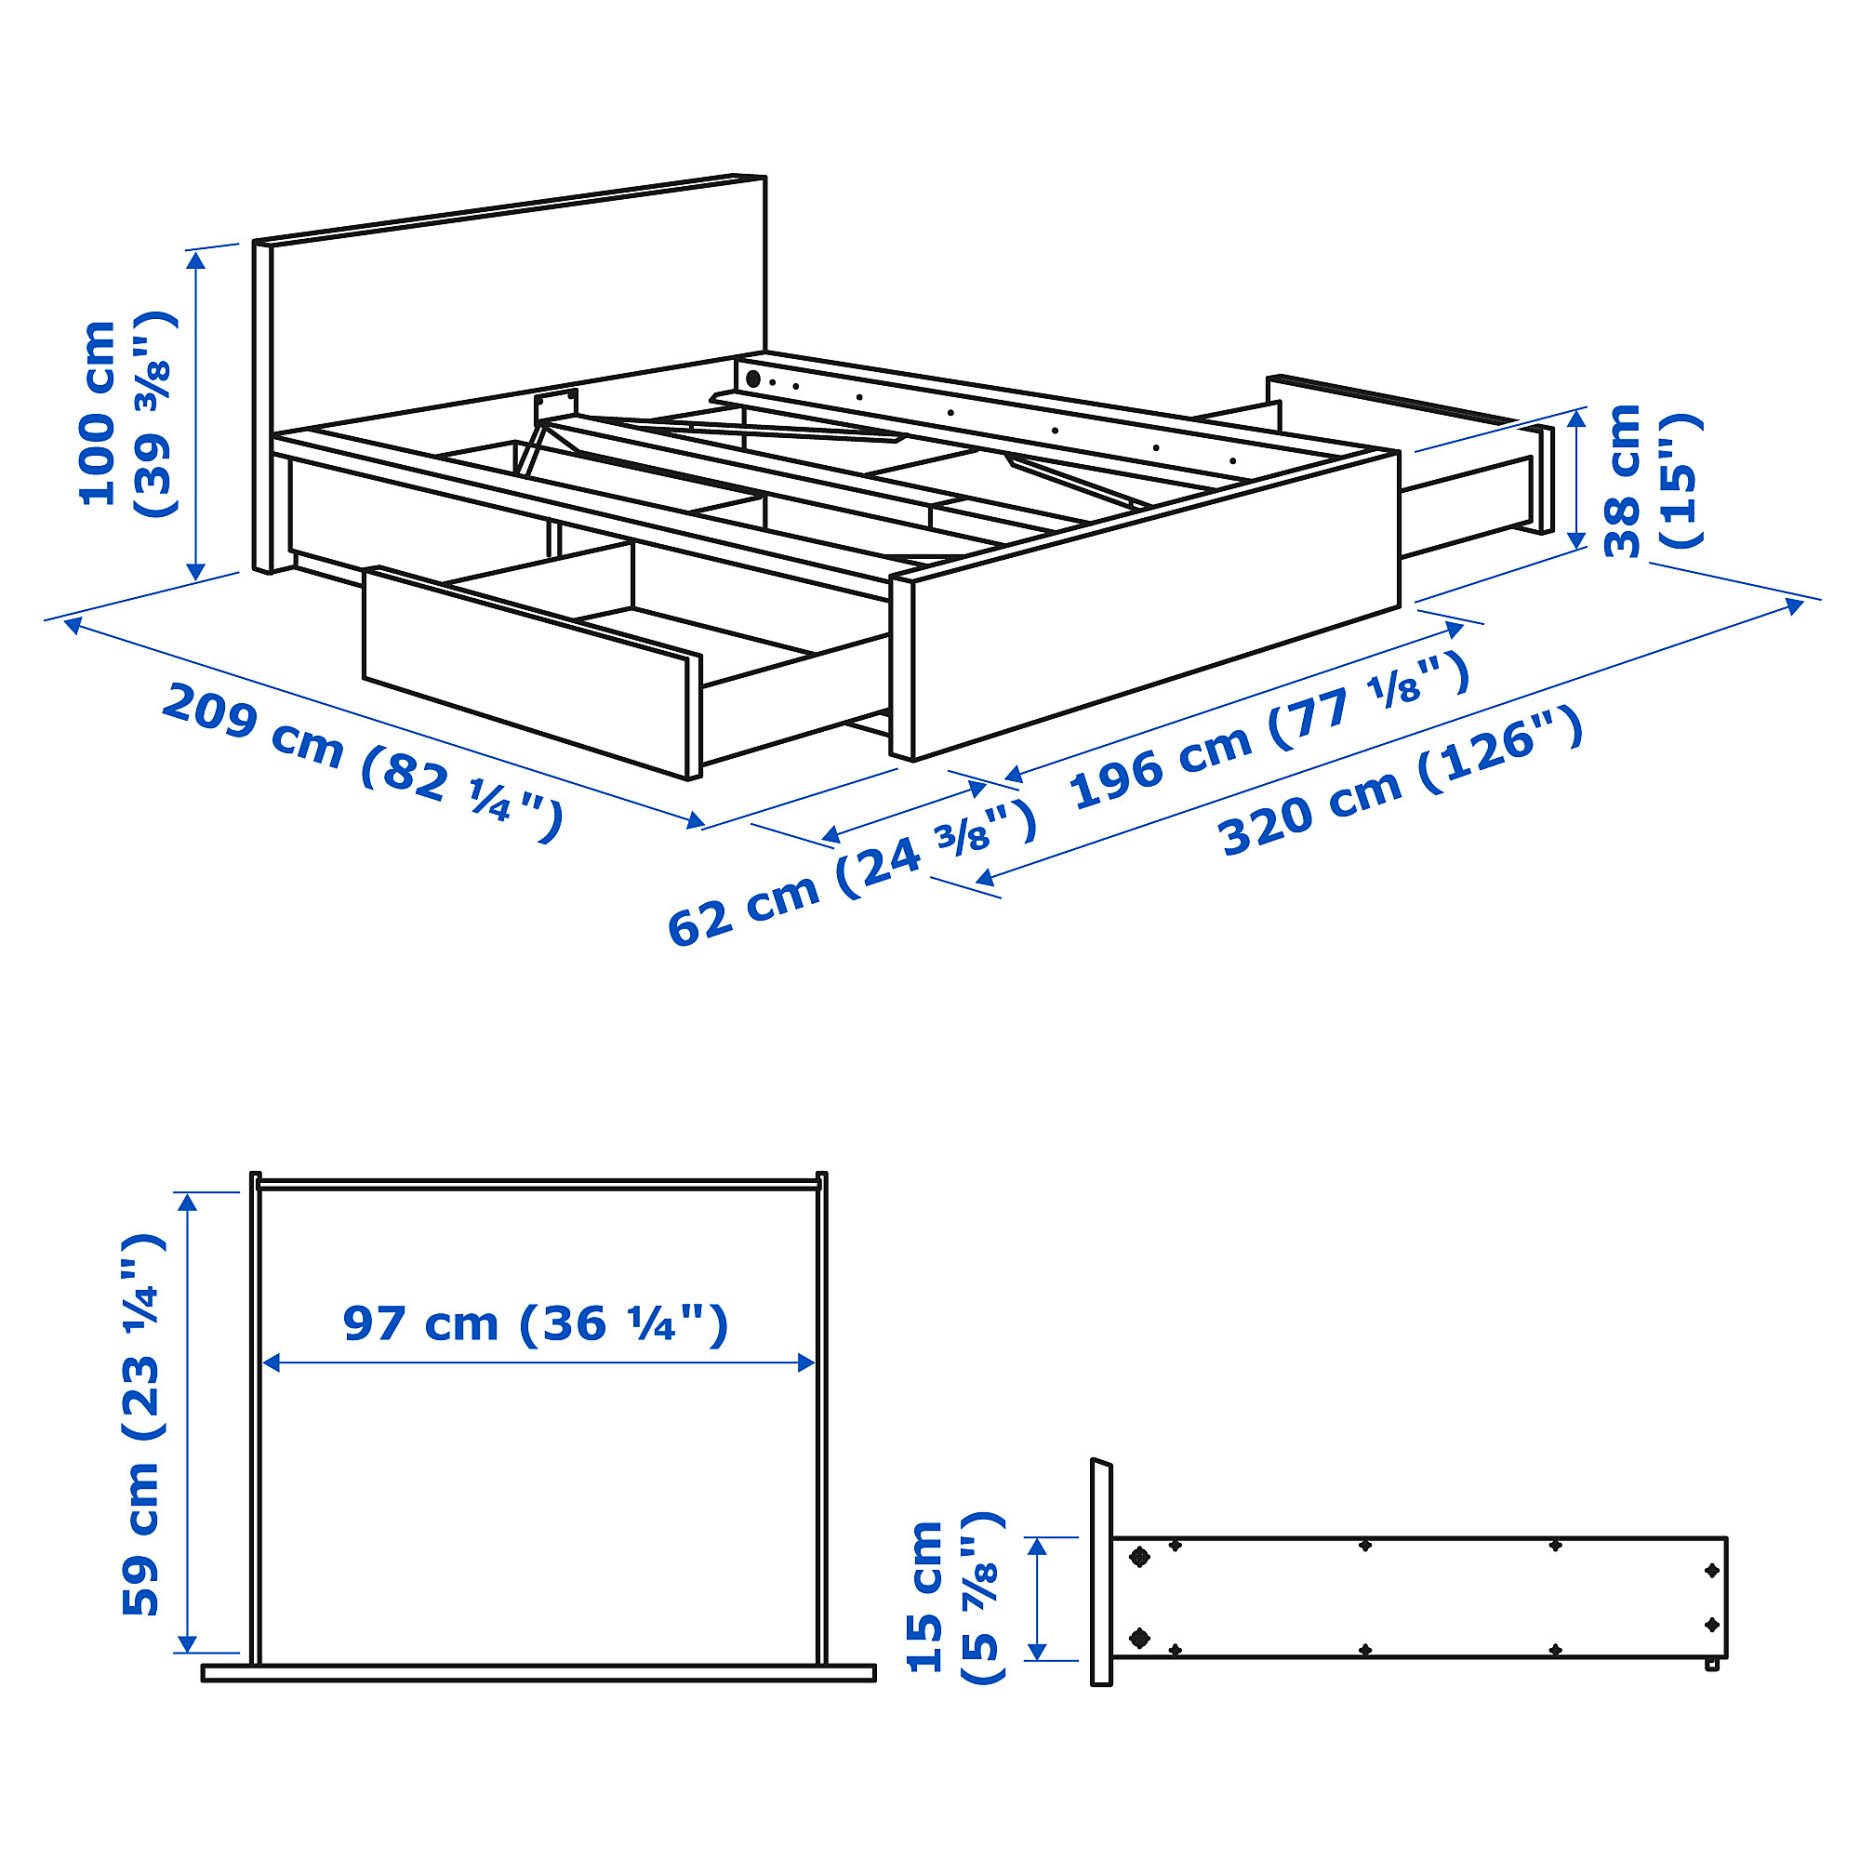 MALM, bed frame/high with 4 storage boxes, 180X200 cm, 891.751.62